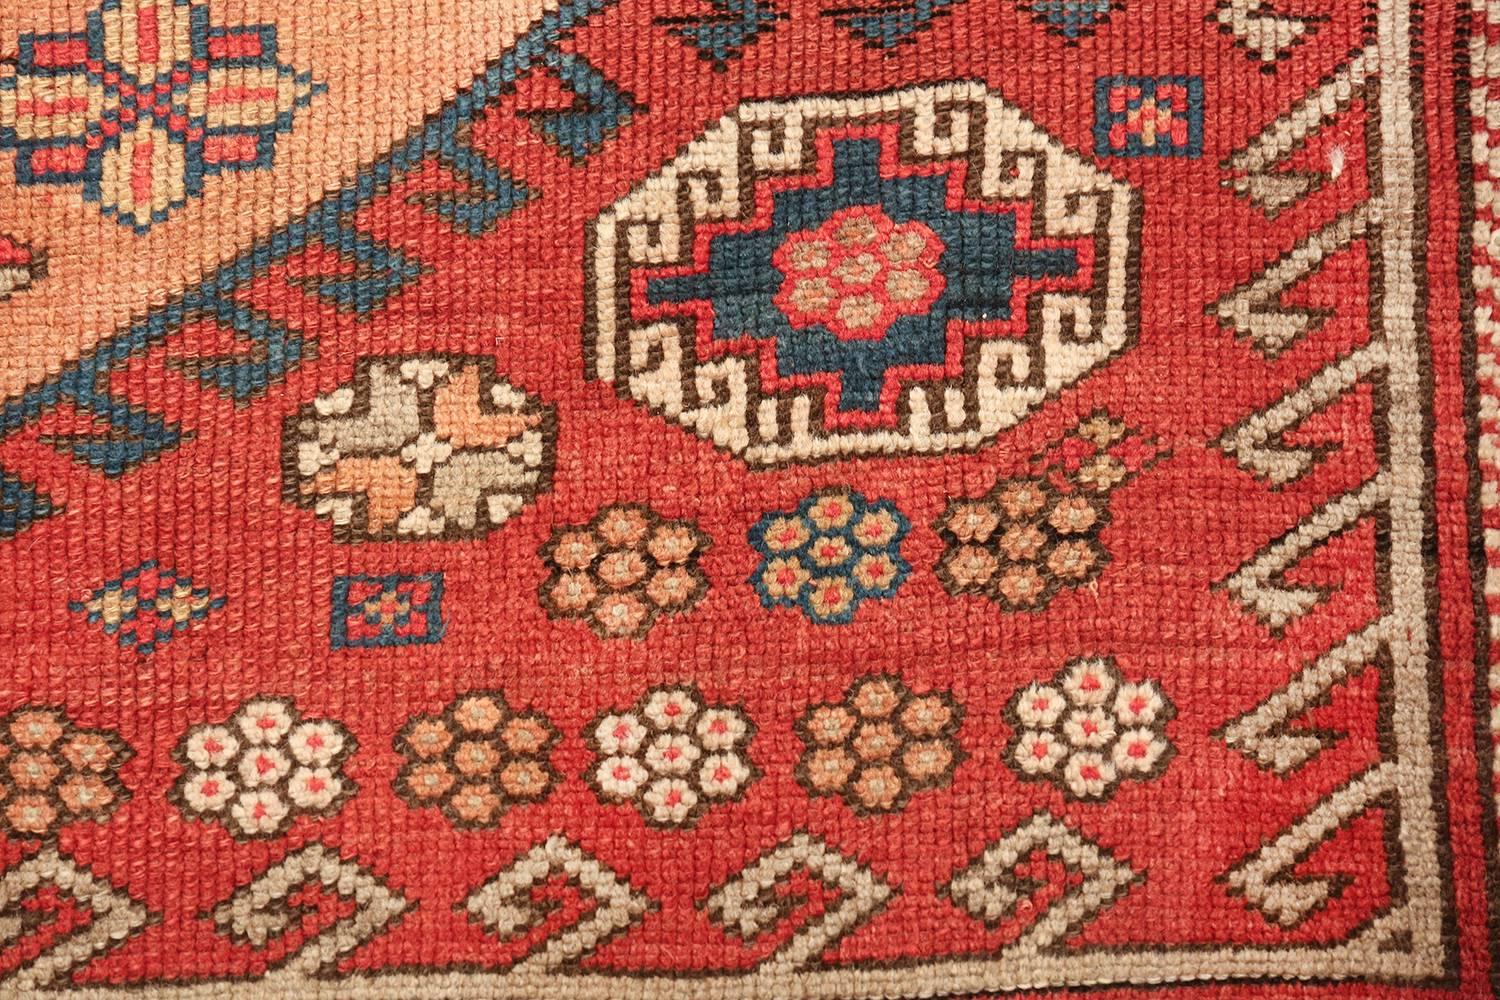 Beautiful antique small size west Anatolian Bergama rug, country of origin / rug type: Turkish rug, date: circa 1870. Size: 5 ft 6 in x 7 ft (1.68 m x 2.13 m).